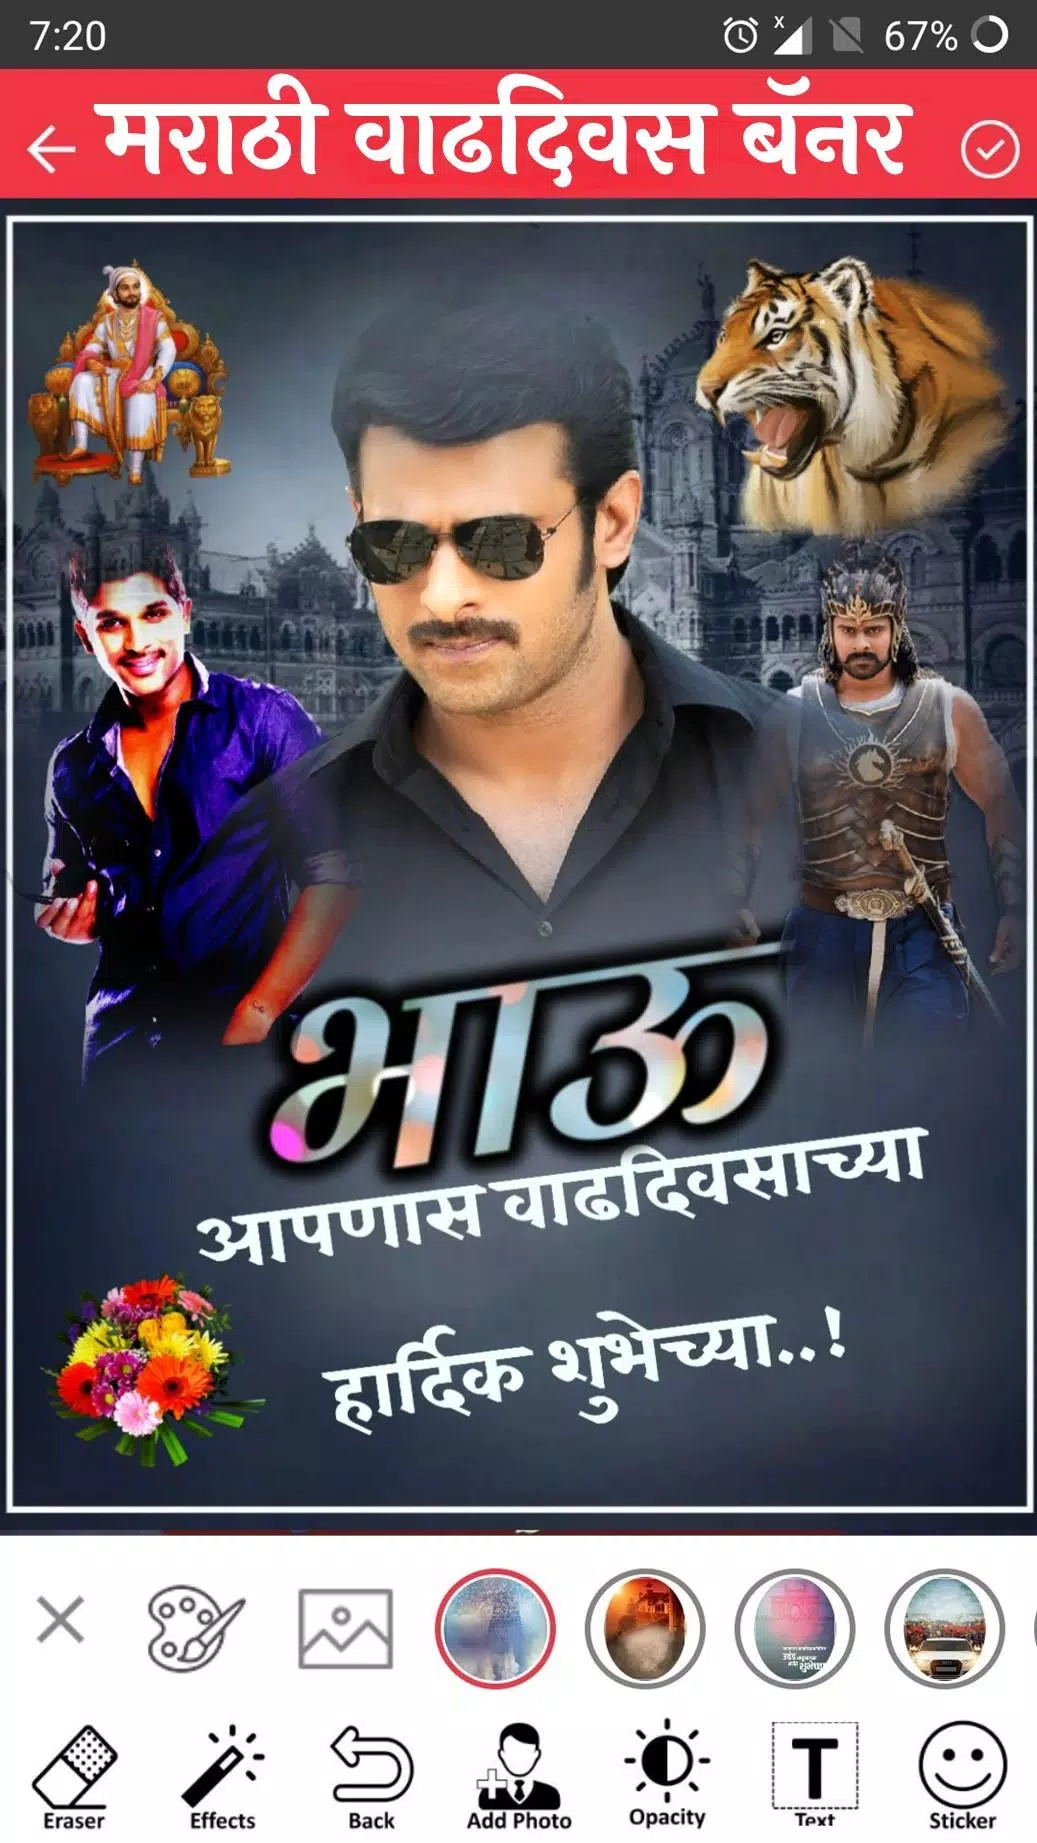 Marathi Happy Birthday Banner Maker & Photo Editor APK for Android Download